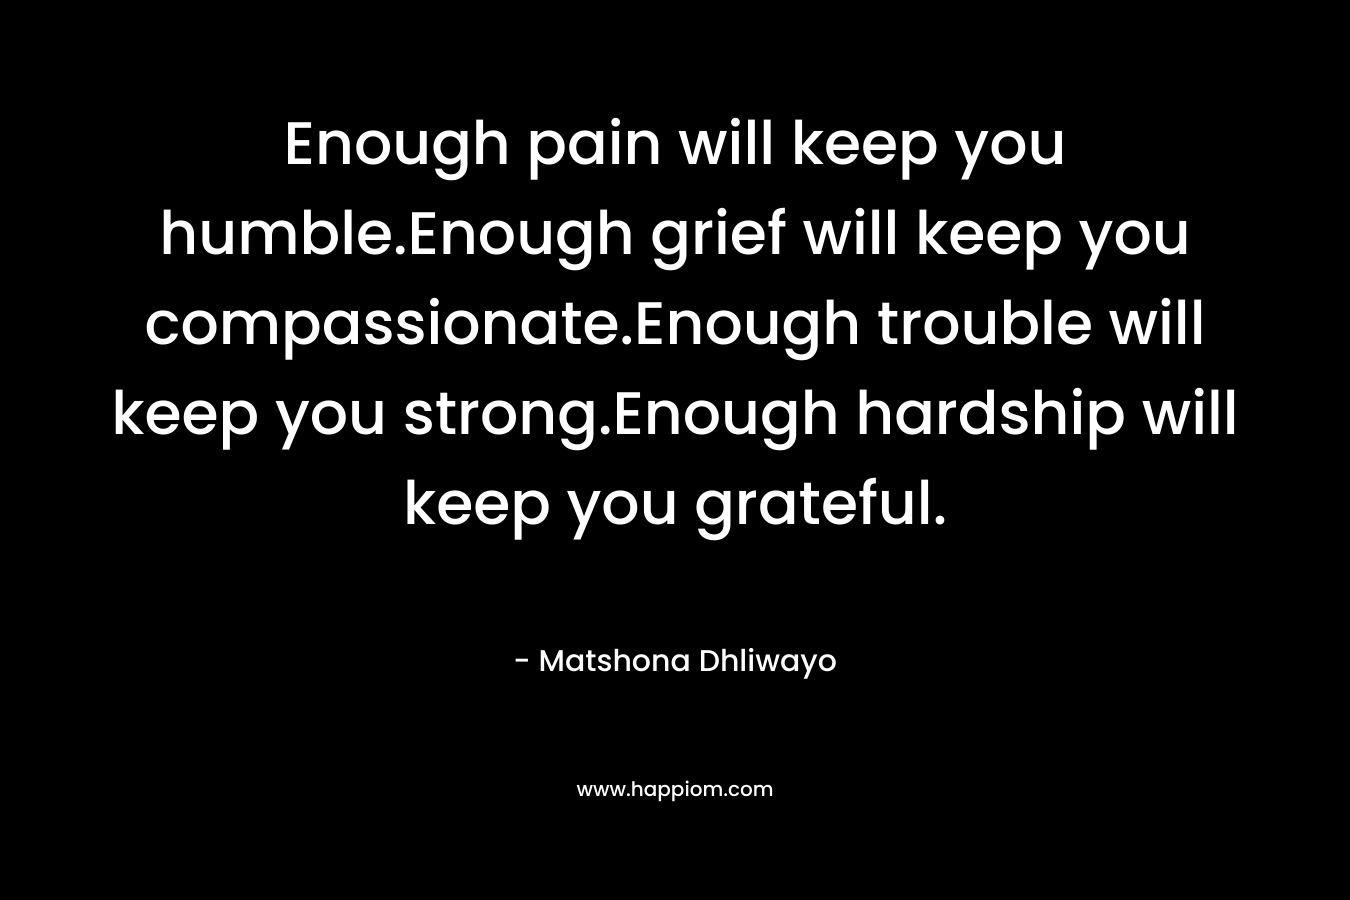 Enough pain will keep you humble.Enough grief will keep you compassionate.Enough trouble will keep you strong.Enough hardship will keep you grateful.